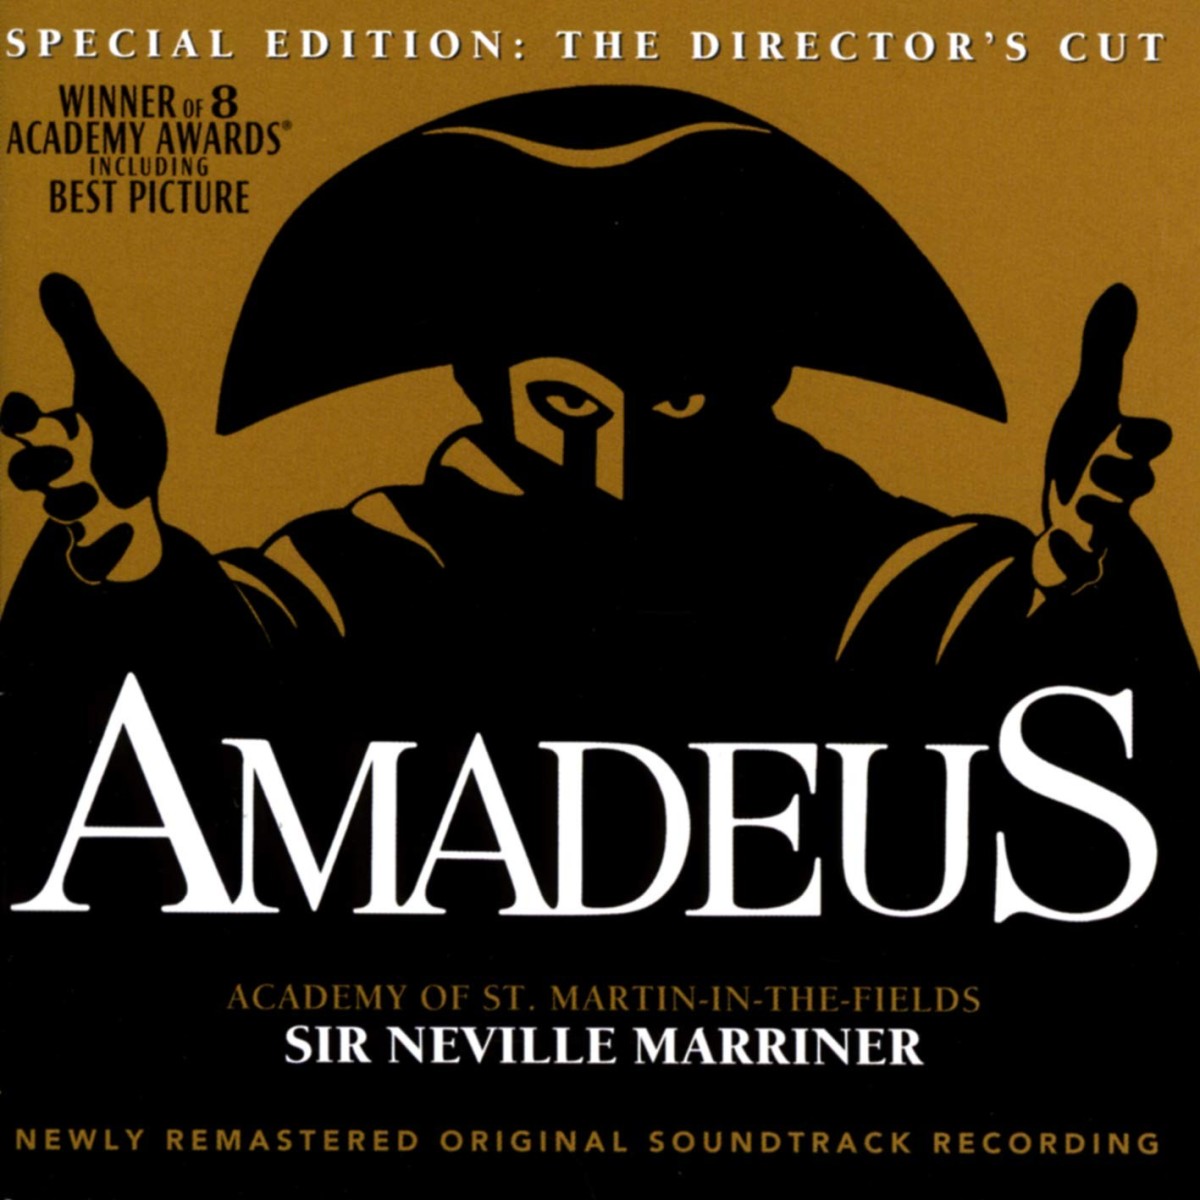 Sir Neville Marriner & Academy Of St. Martin-In-The-Fields - Amadeus Original Soundtrack Recording